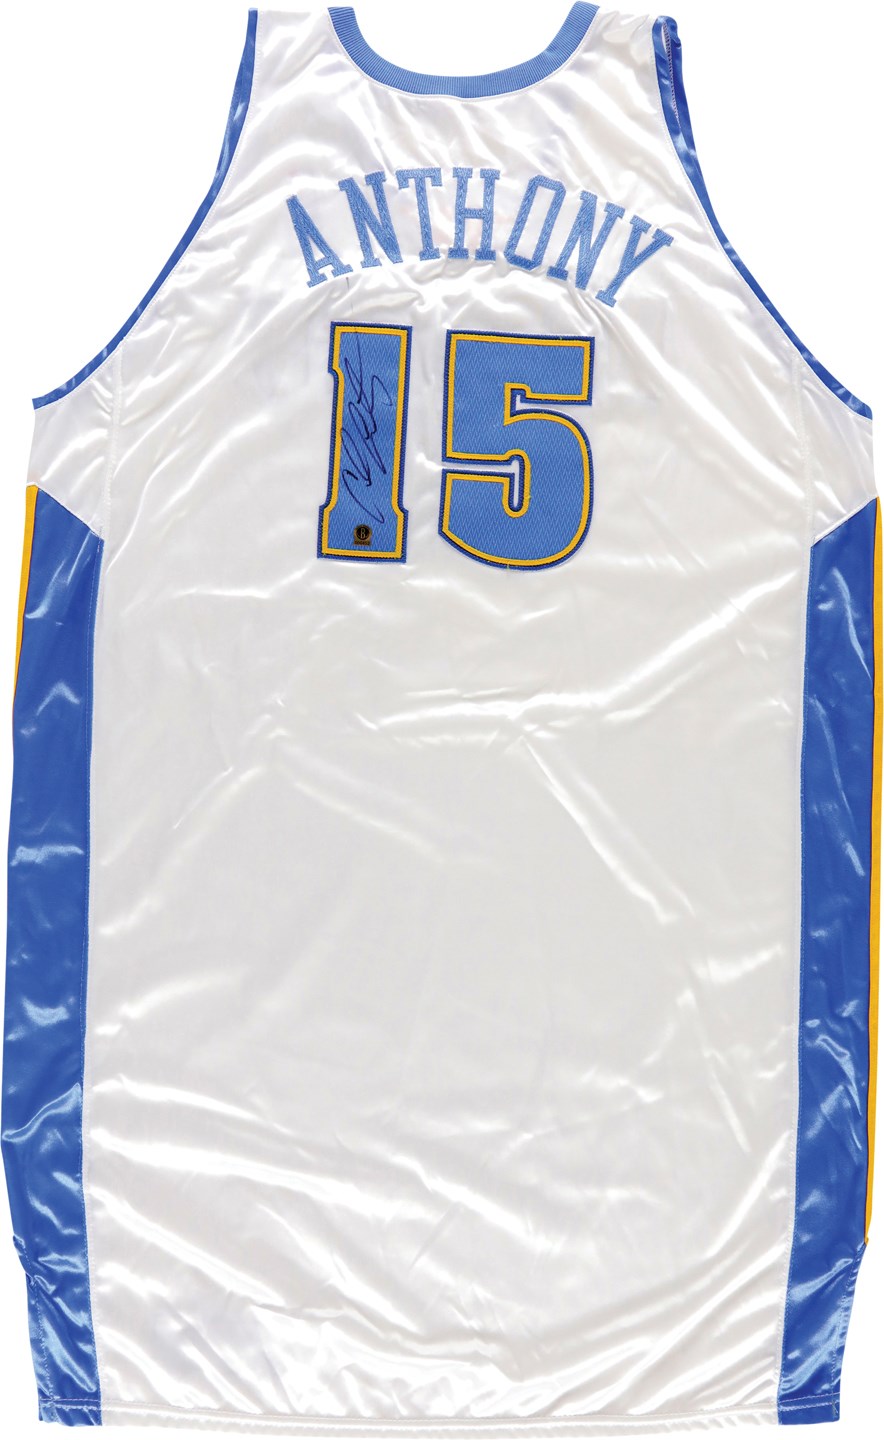 Basketball - 12/26/03 Carmelo Anthony Rookie Denver Nuggets Signed Game Worn Jersey - 37 Point and Season-High Three Pointer Game (Melo Beckett COA)